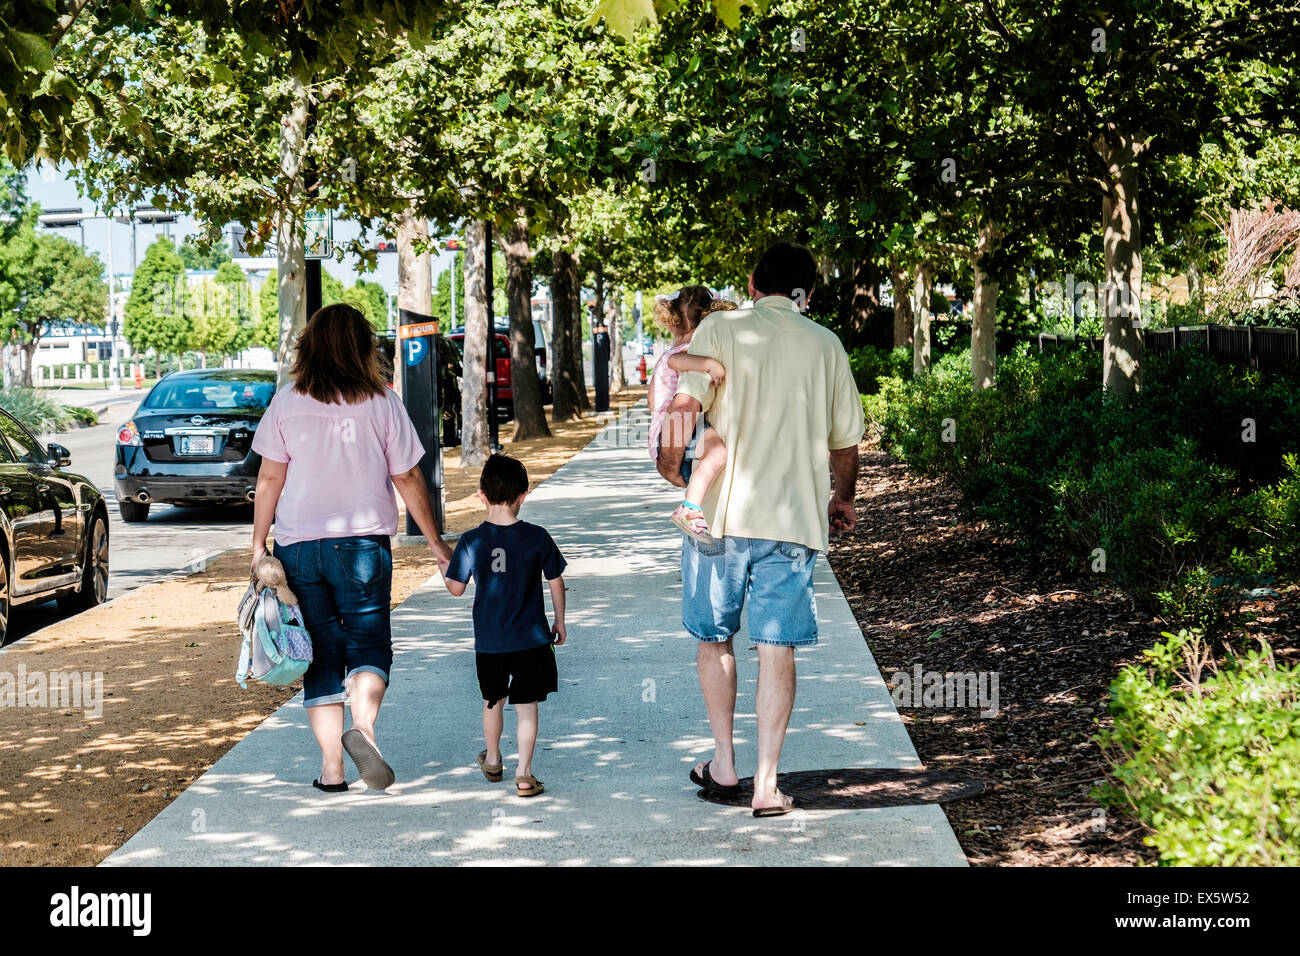 Two parents walk down a sidewalk with their two small children, a boy and a girl. Stock Photo